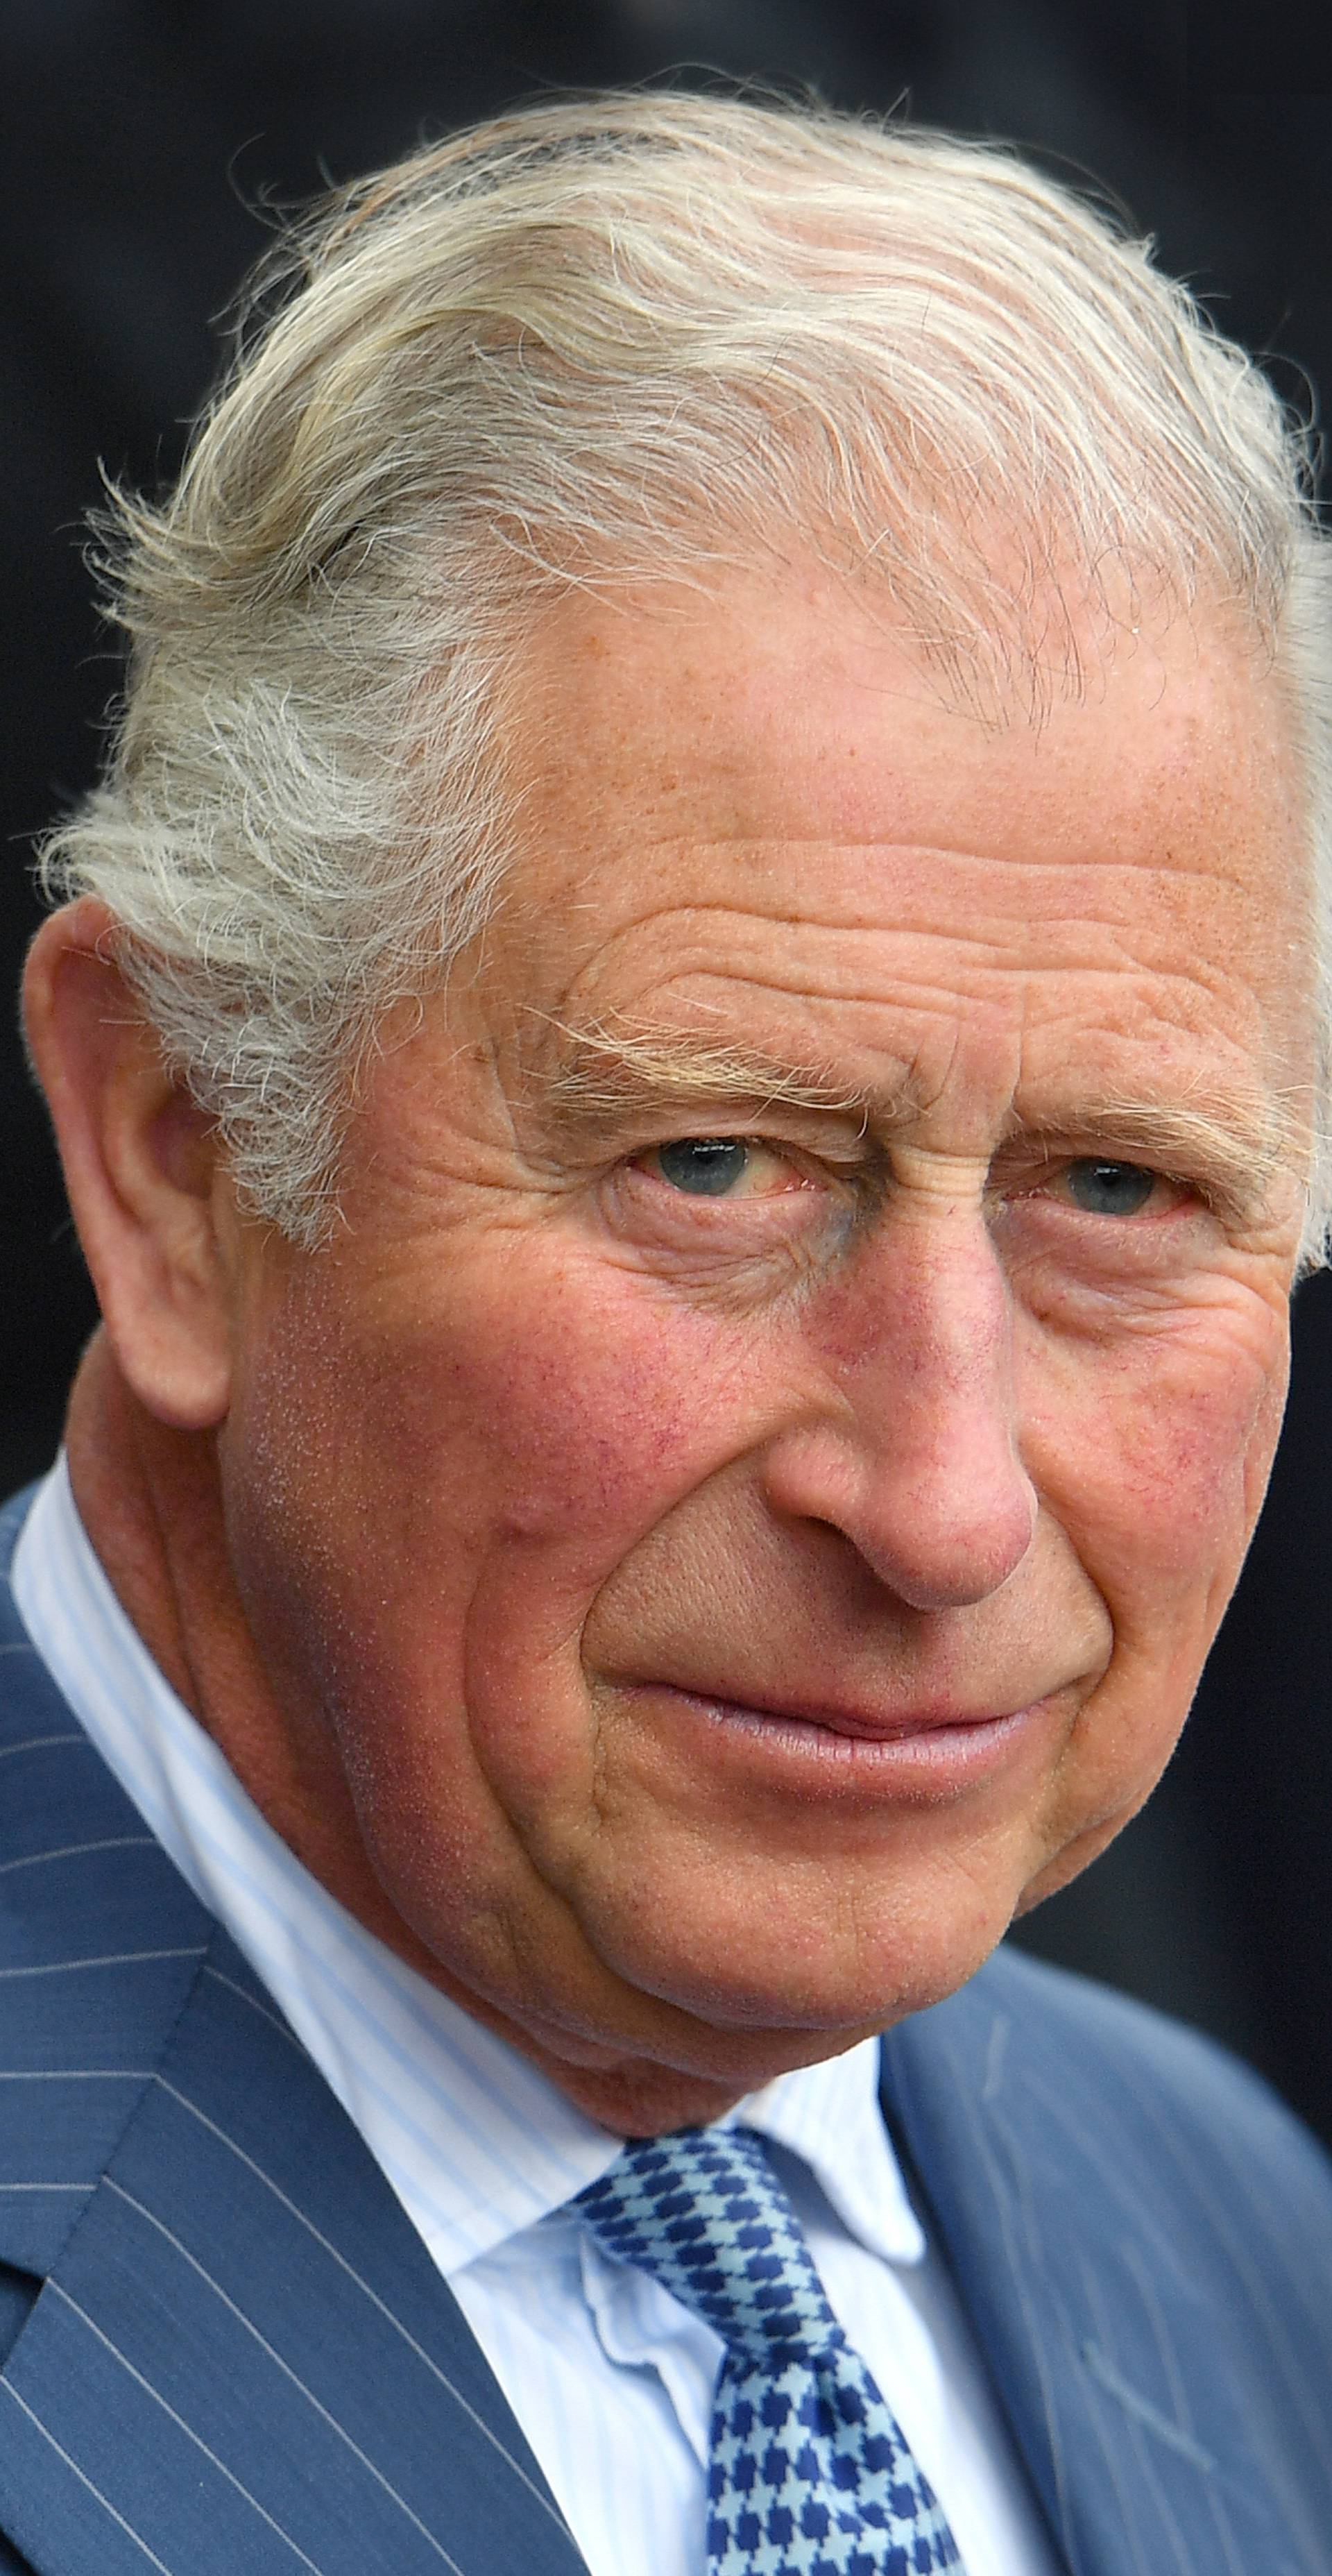 Prince Charles is infected with the Corona Virus.